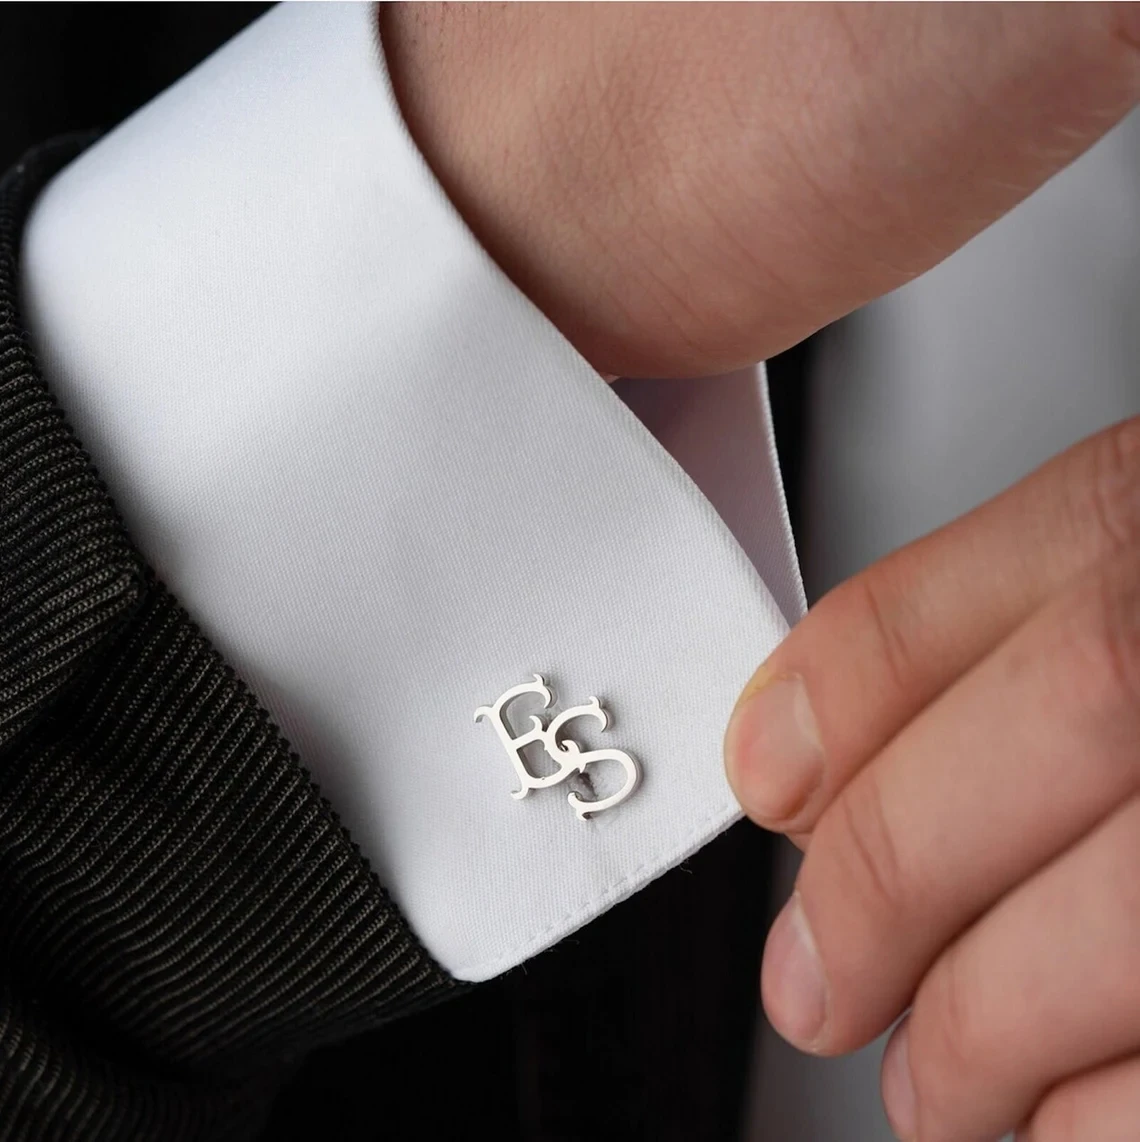 

Personalize Custom Men's Initials Cufflinks Stainless Steel Letter Cuff Links Engagement Wedding Jewelry for Groom